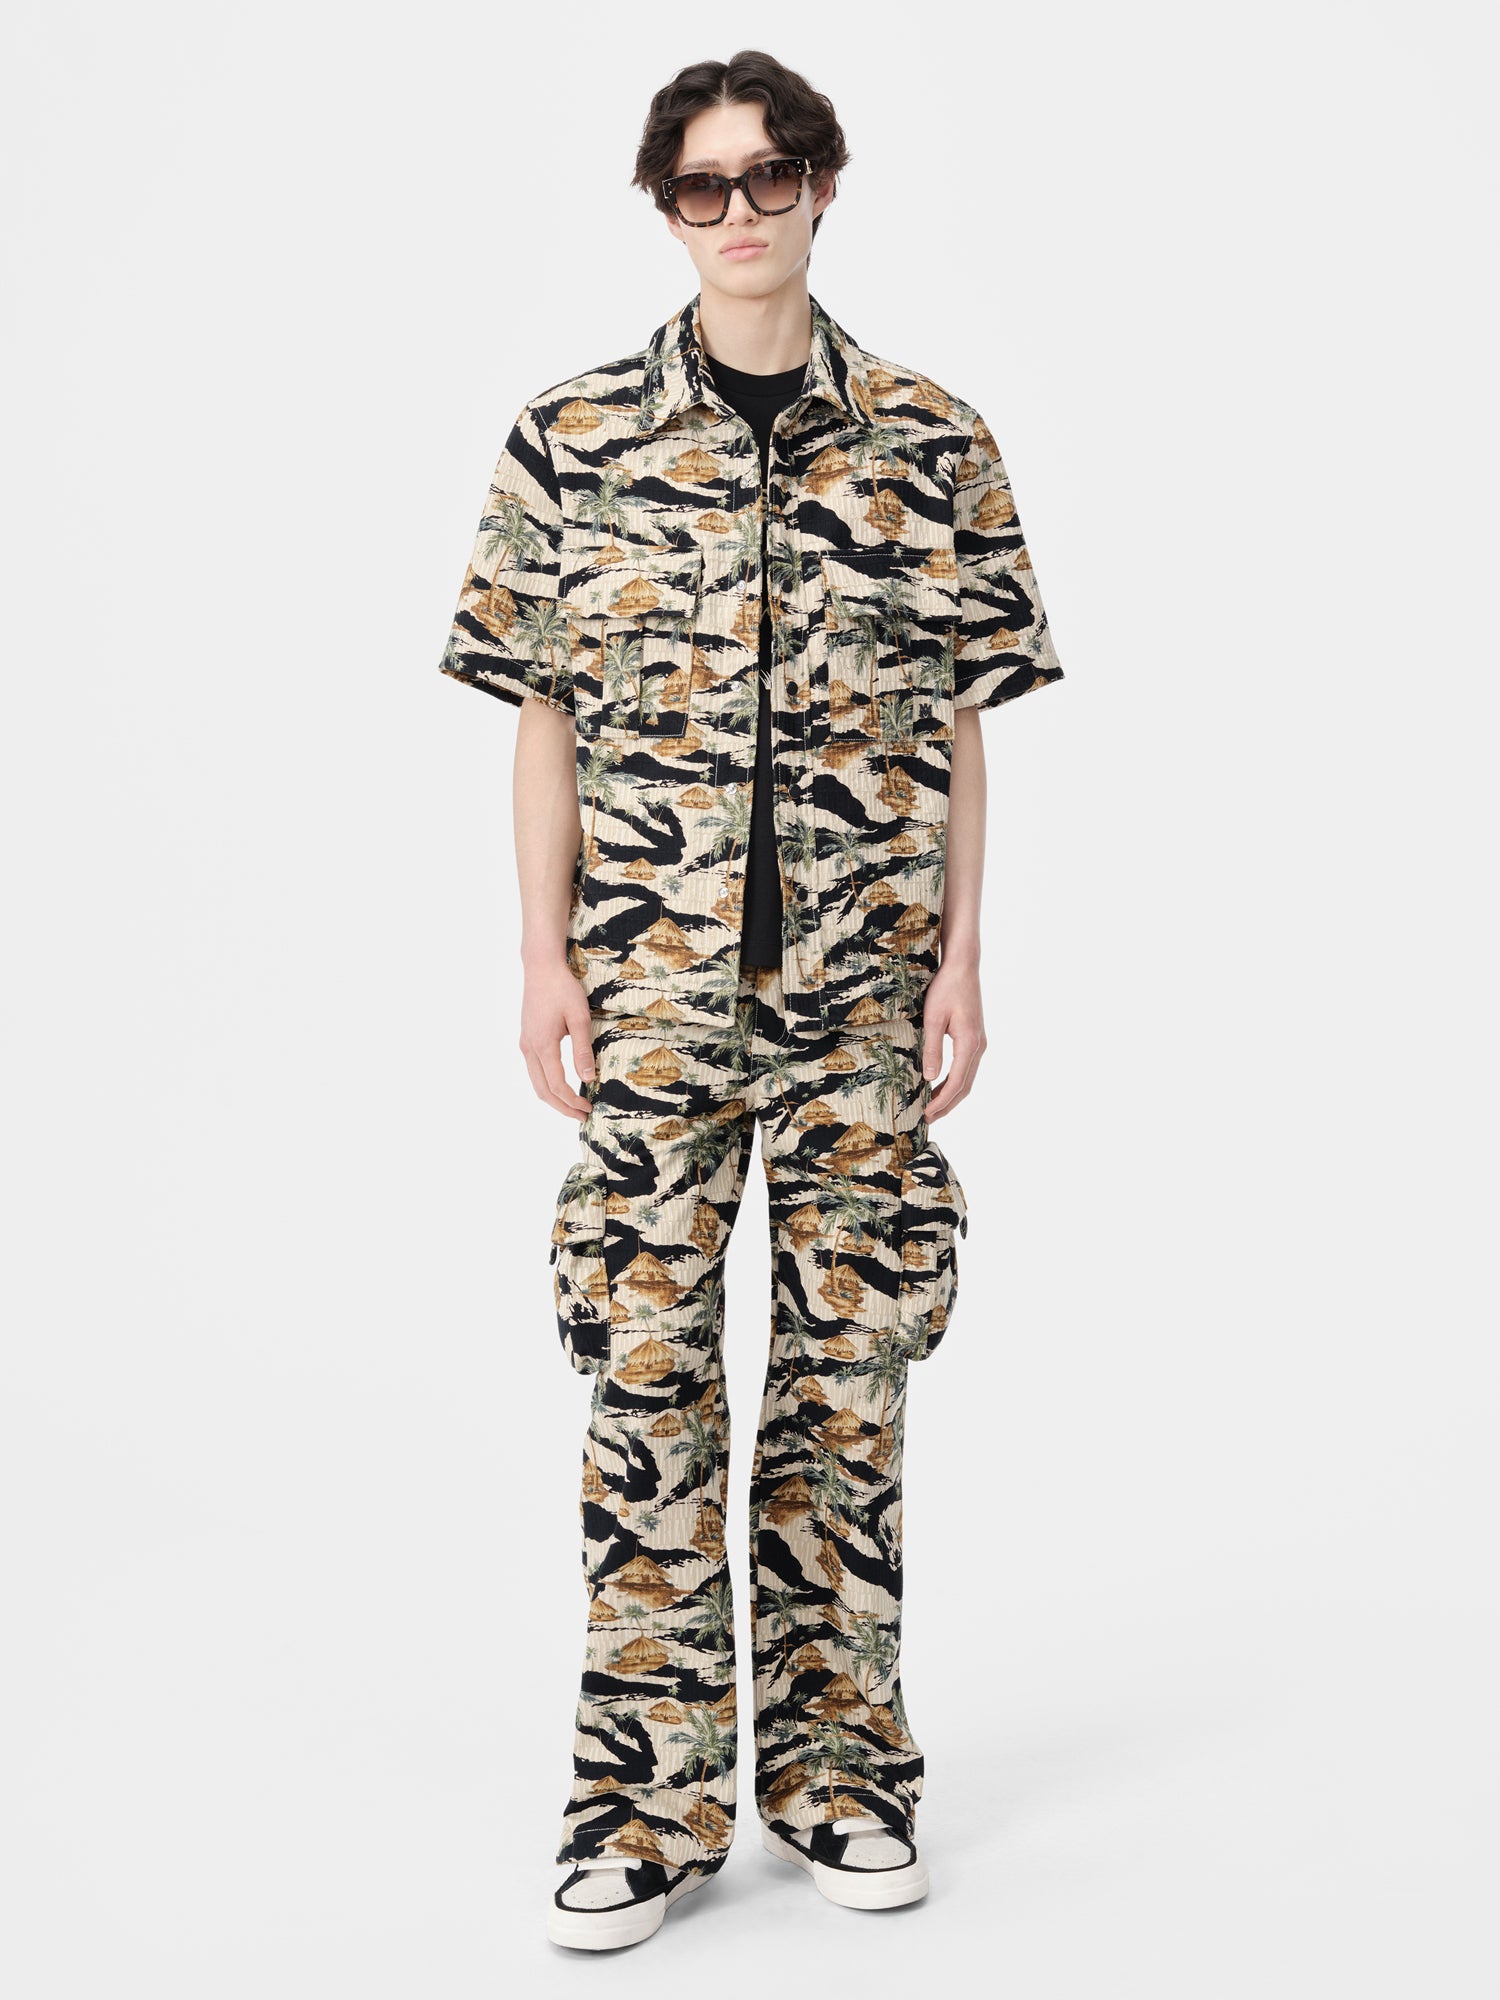 Product AMIRI REPEAT PALM CAMP SHIRT - Mojave Desert featured image